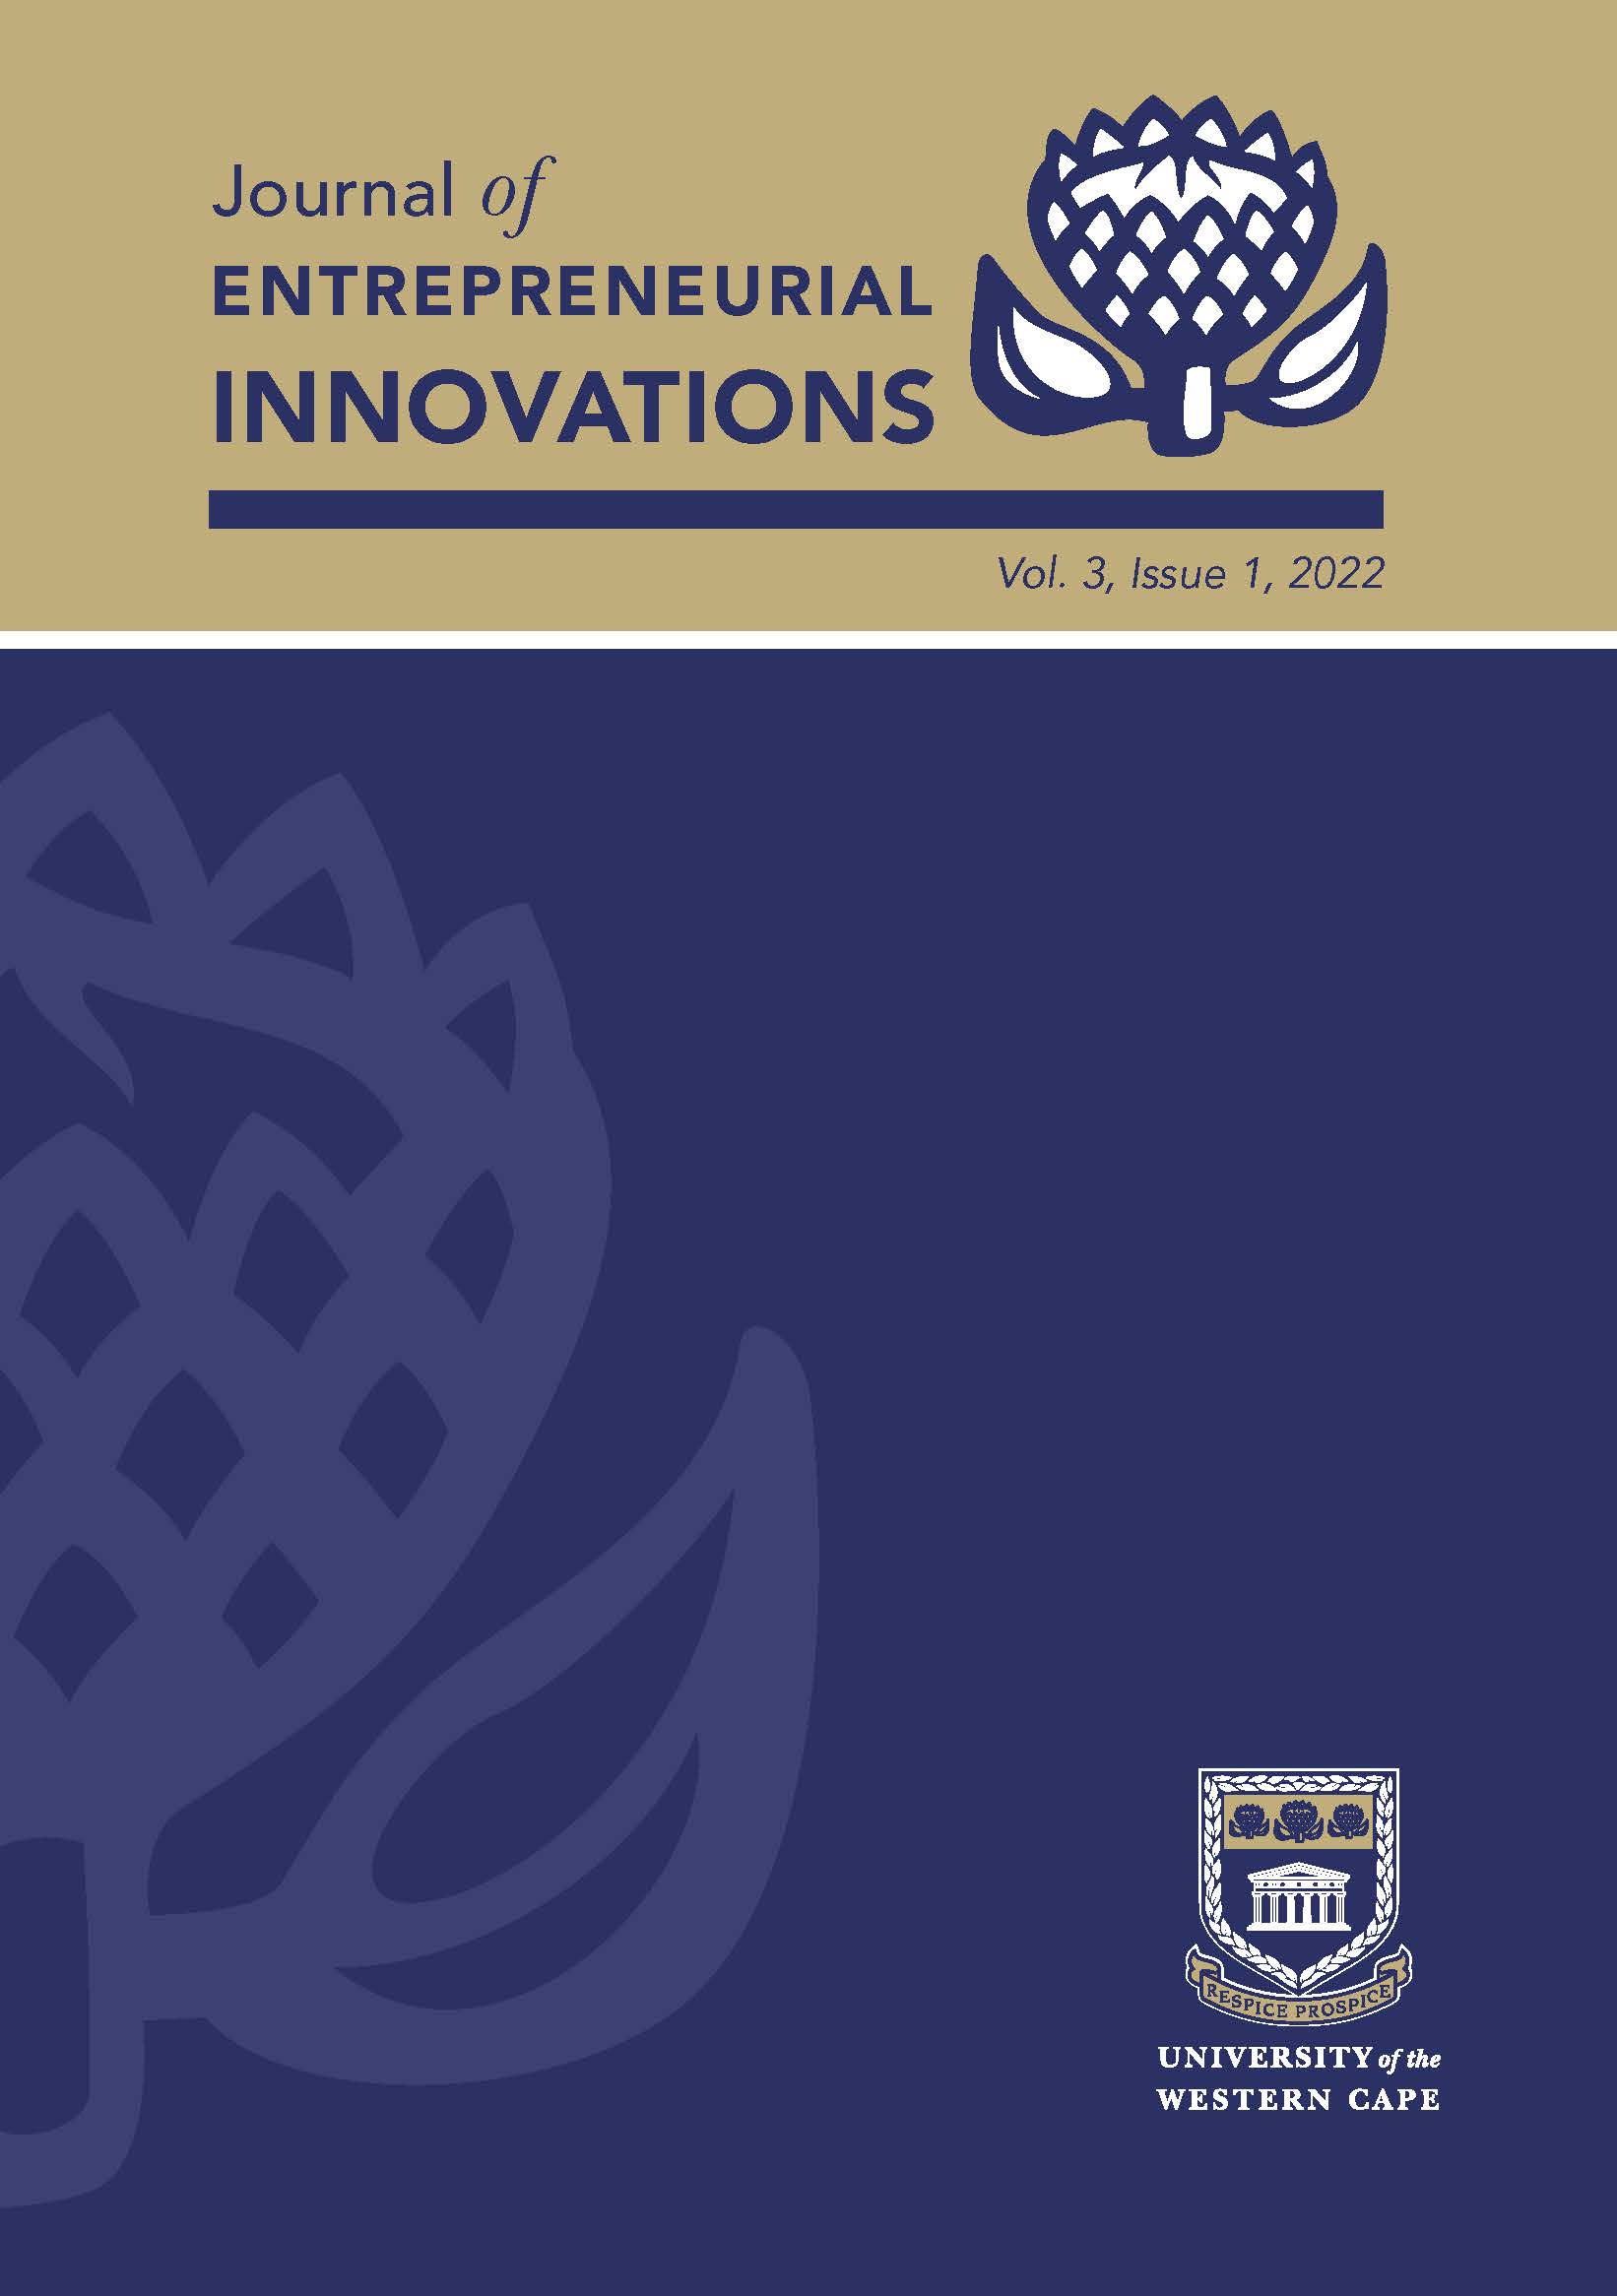 					View Vol. 3 No. 1 (2022): JOURNAL OF ENTREPRENEURIAL INNOVATIONS
				